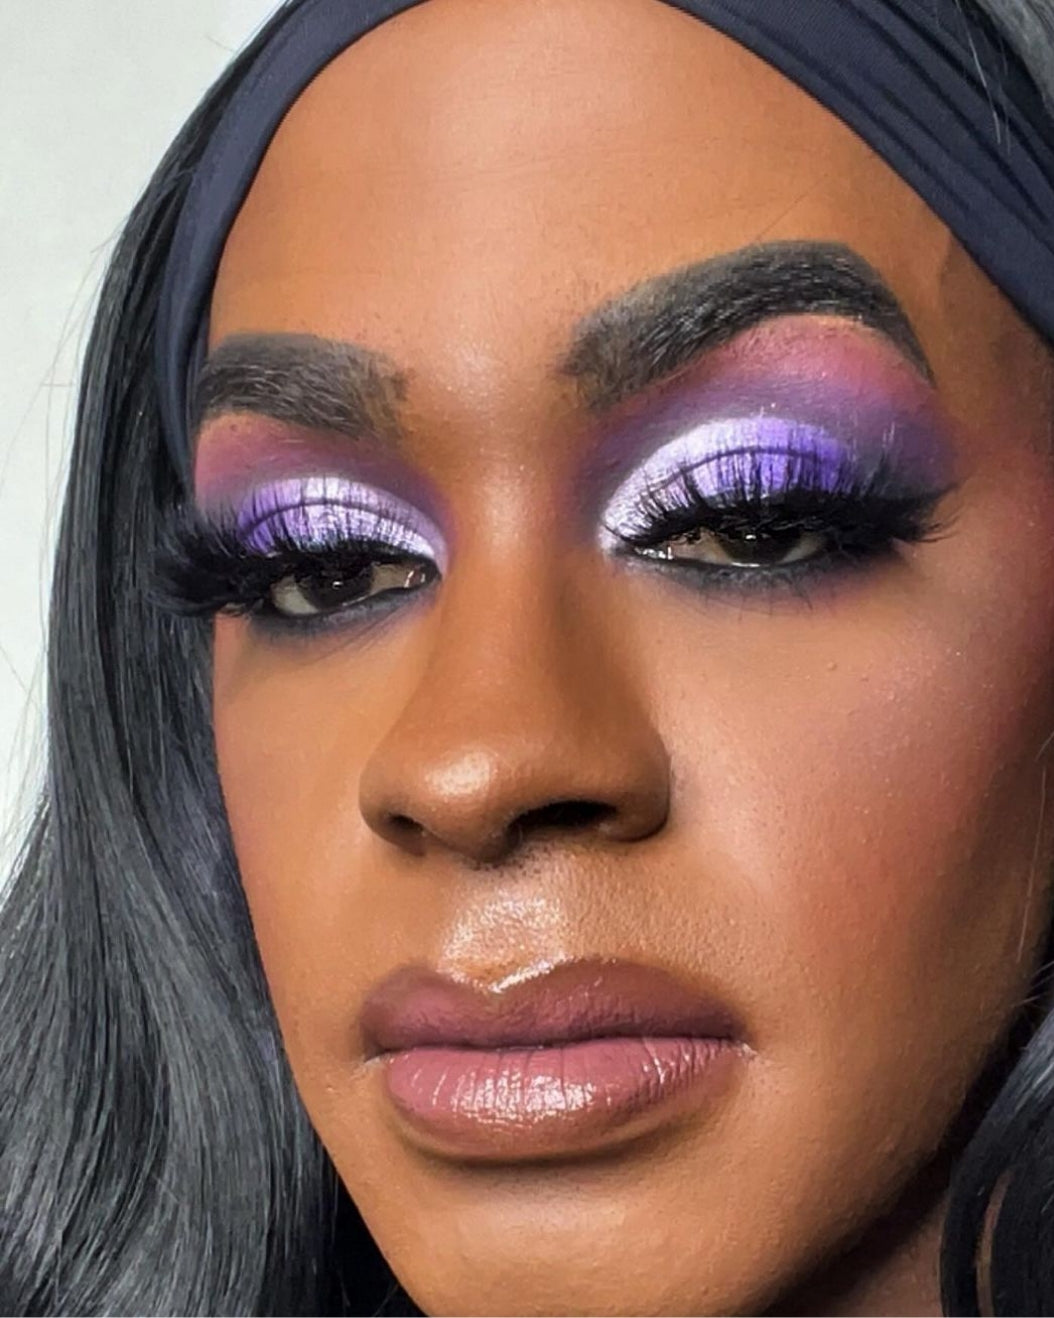 Model wears colorful eye makeup with colorful eyelashes for holiday makeup inspiration